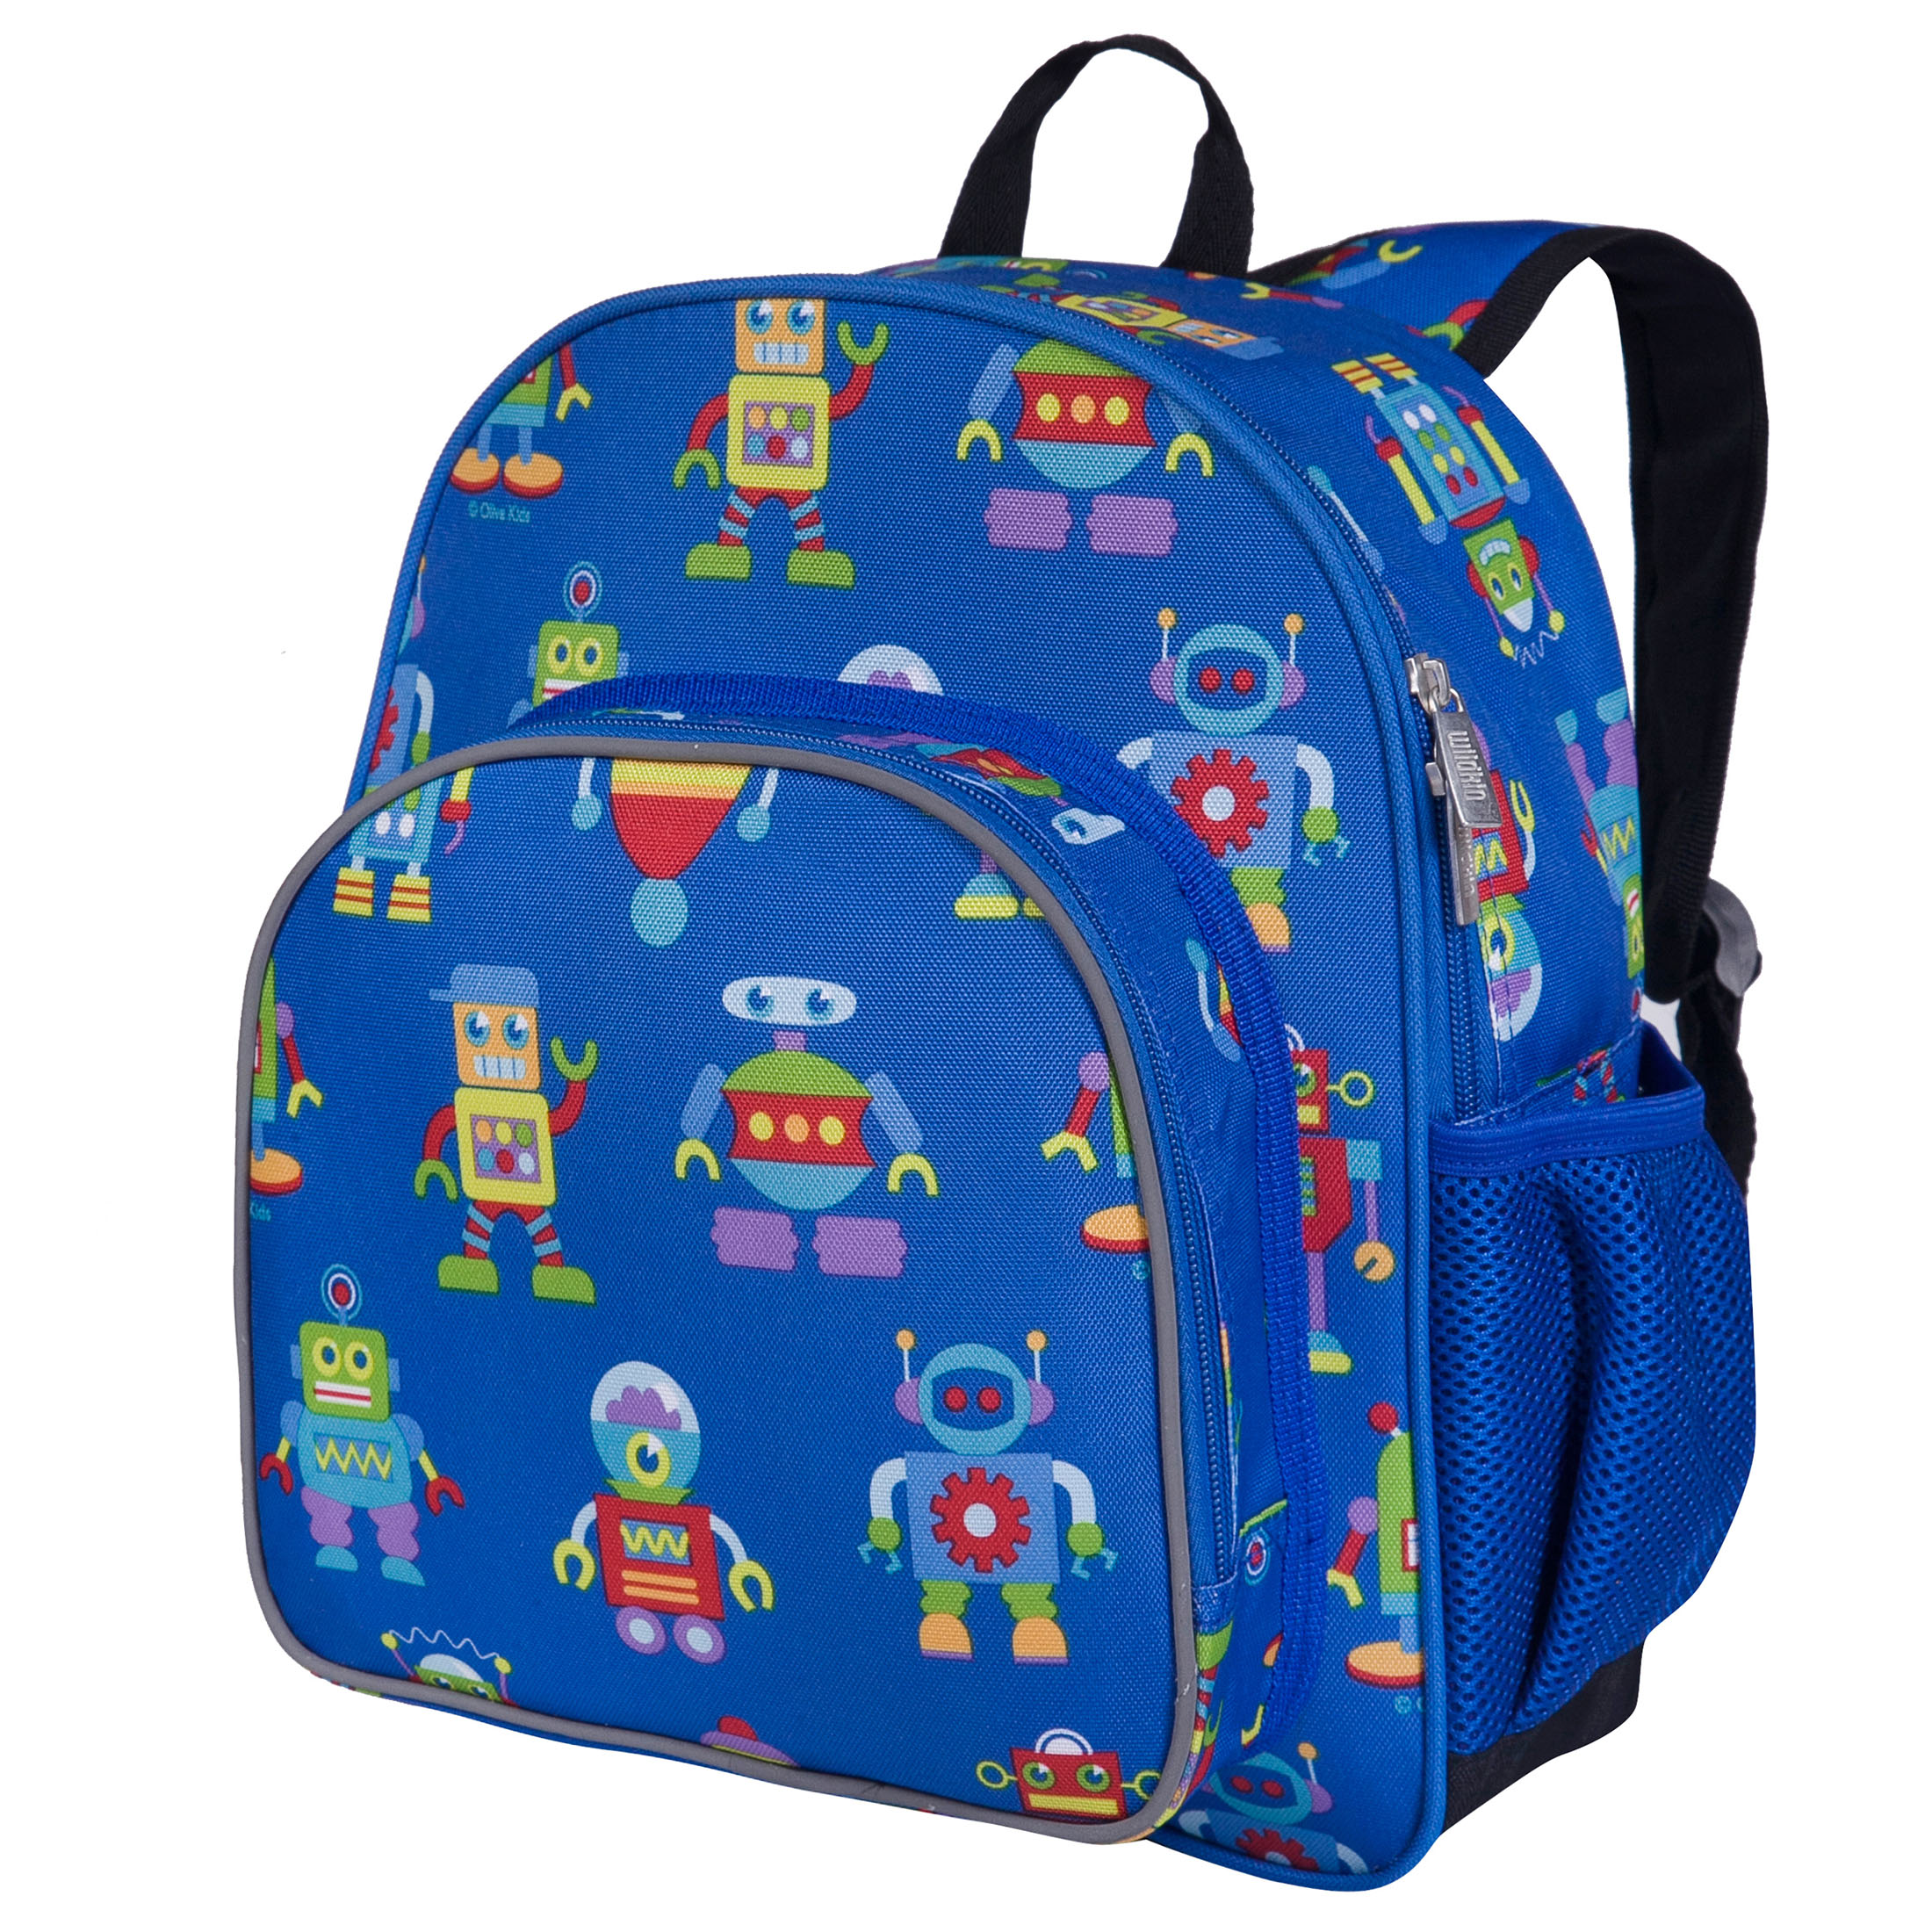 Wildkin Kids 12 Inch Backpack for Toddler Boys and Girls, Insulated Front Pocket (Robots Blue) - image 1 of 8